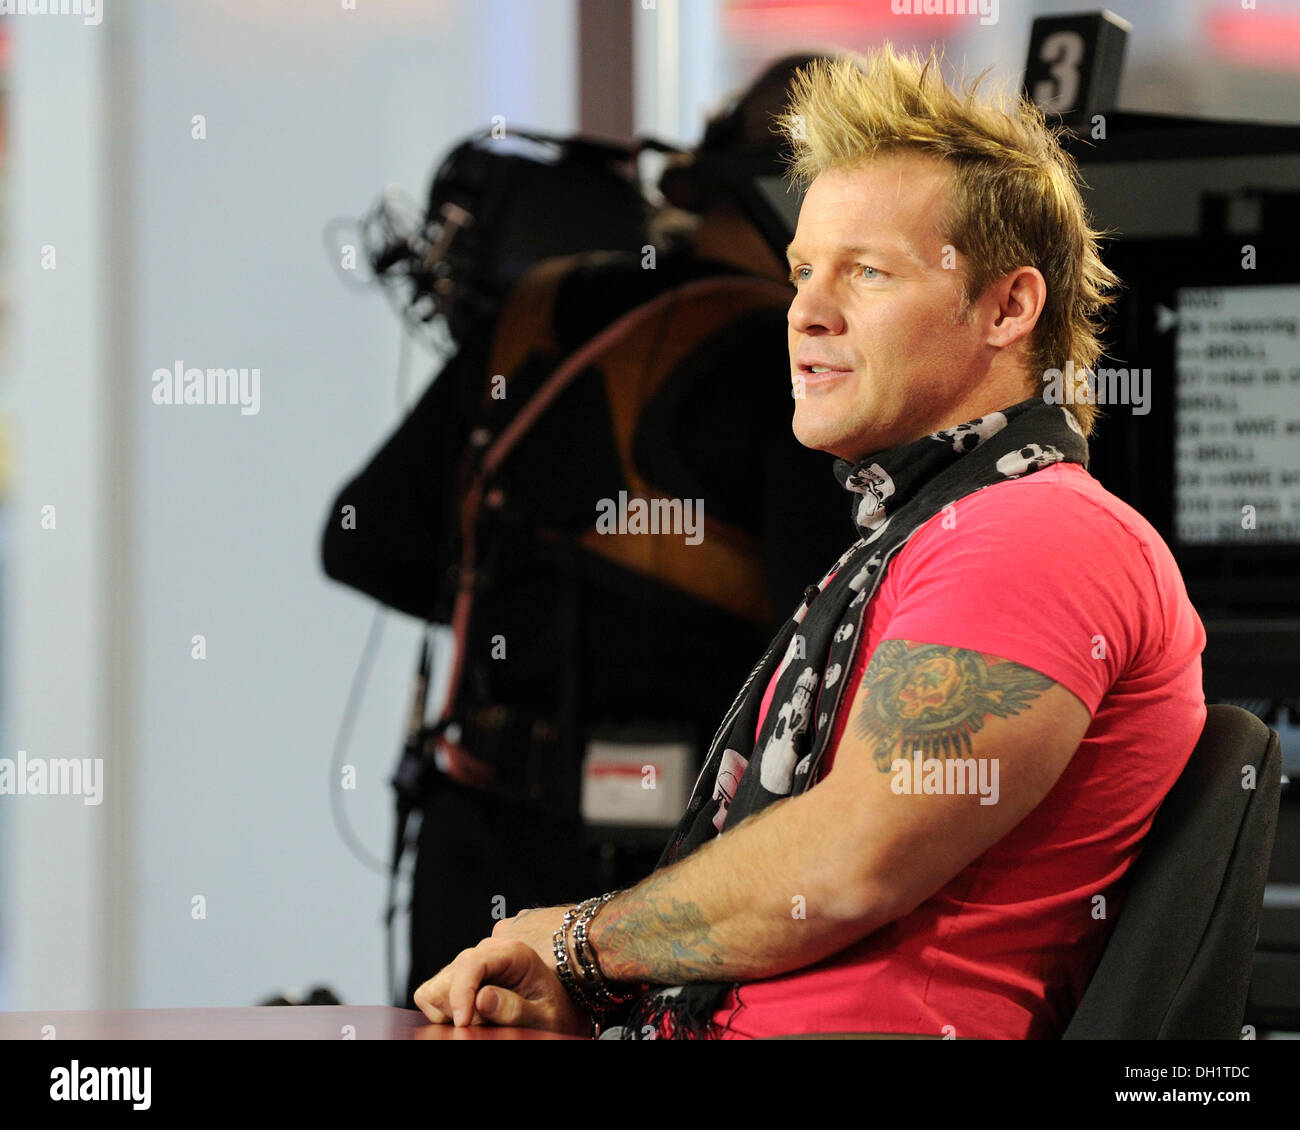 Toronto, Canada. 29th Oct 2013. Six times WWE (World Wrestling Entertainment) Champion, Chris Jericho appears on Global TV's THE MORNING SHOW sharing his experience professional wrestling career, his roles on television and his new web series But I’m Chris Jericho. Credit:  EXImages/Alamy Live News Stock Photo